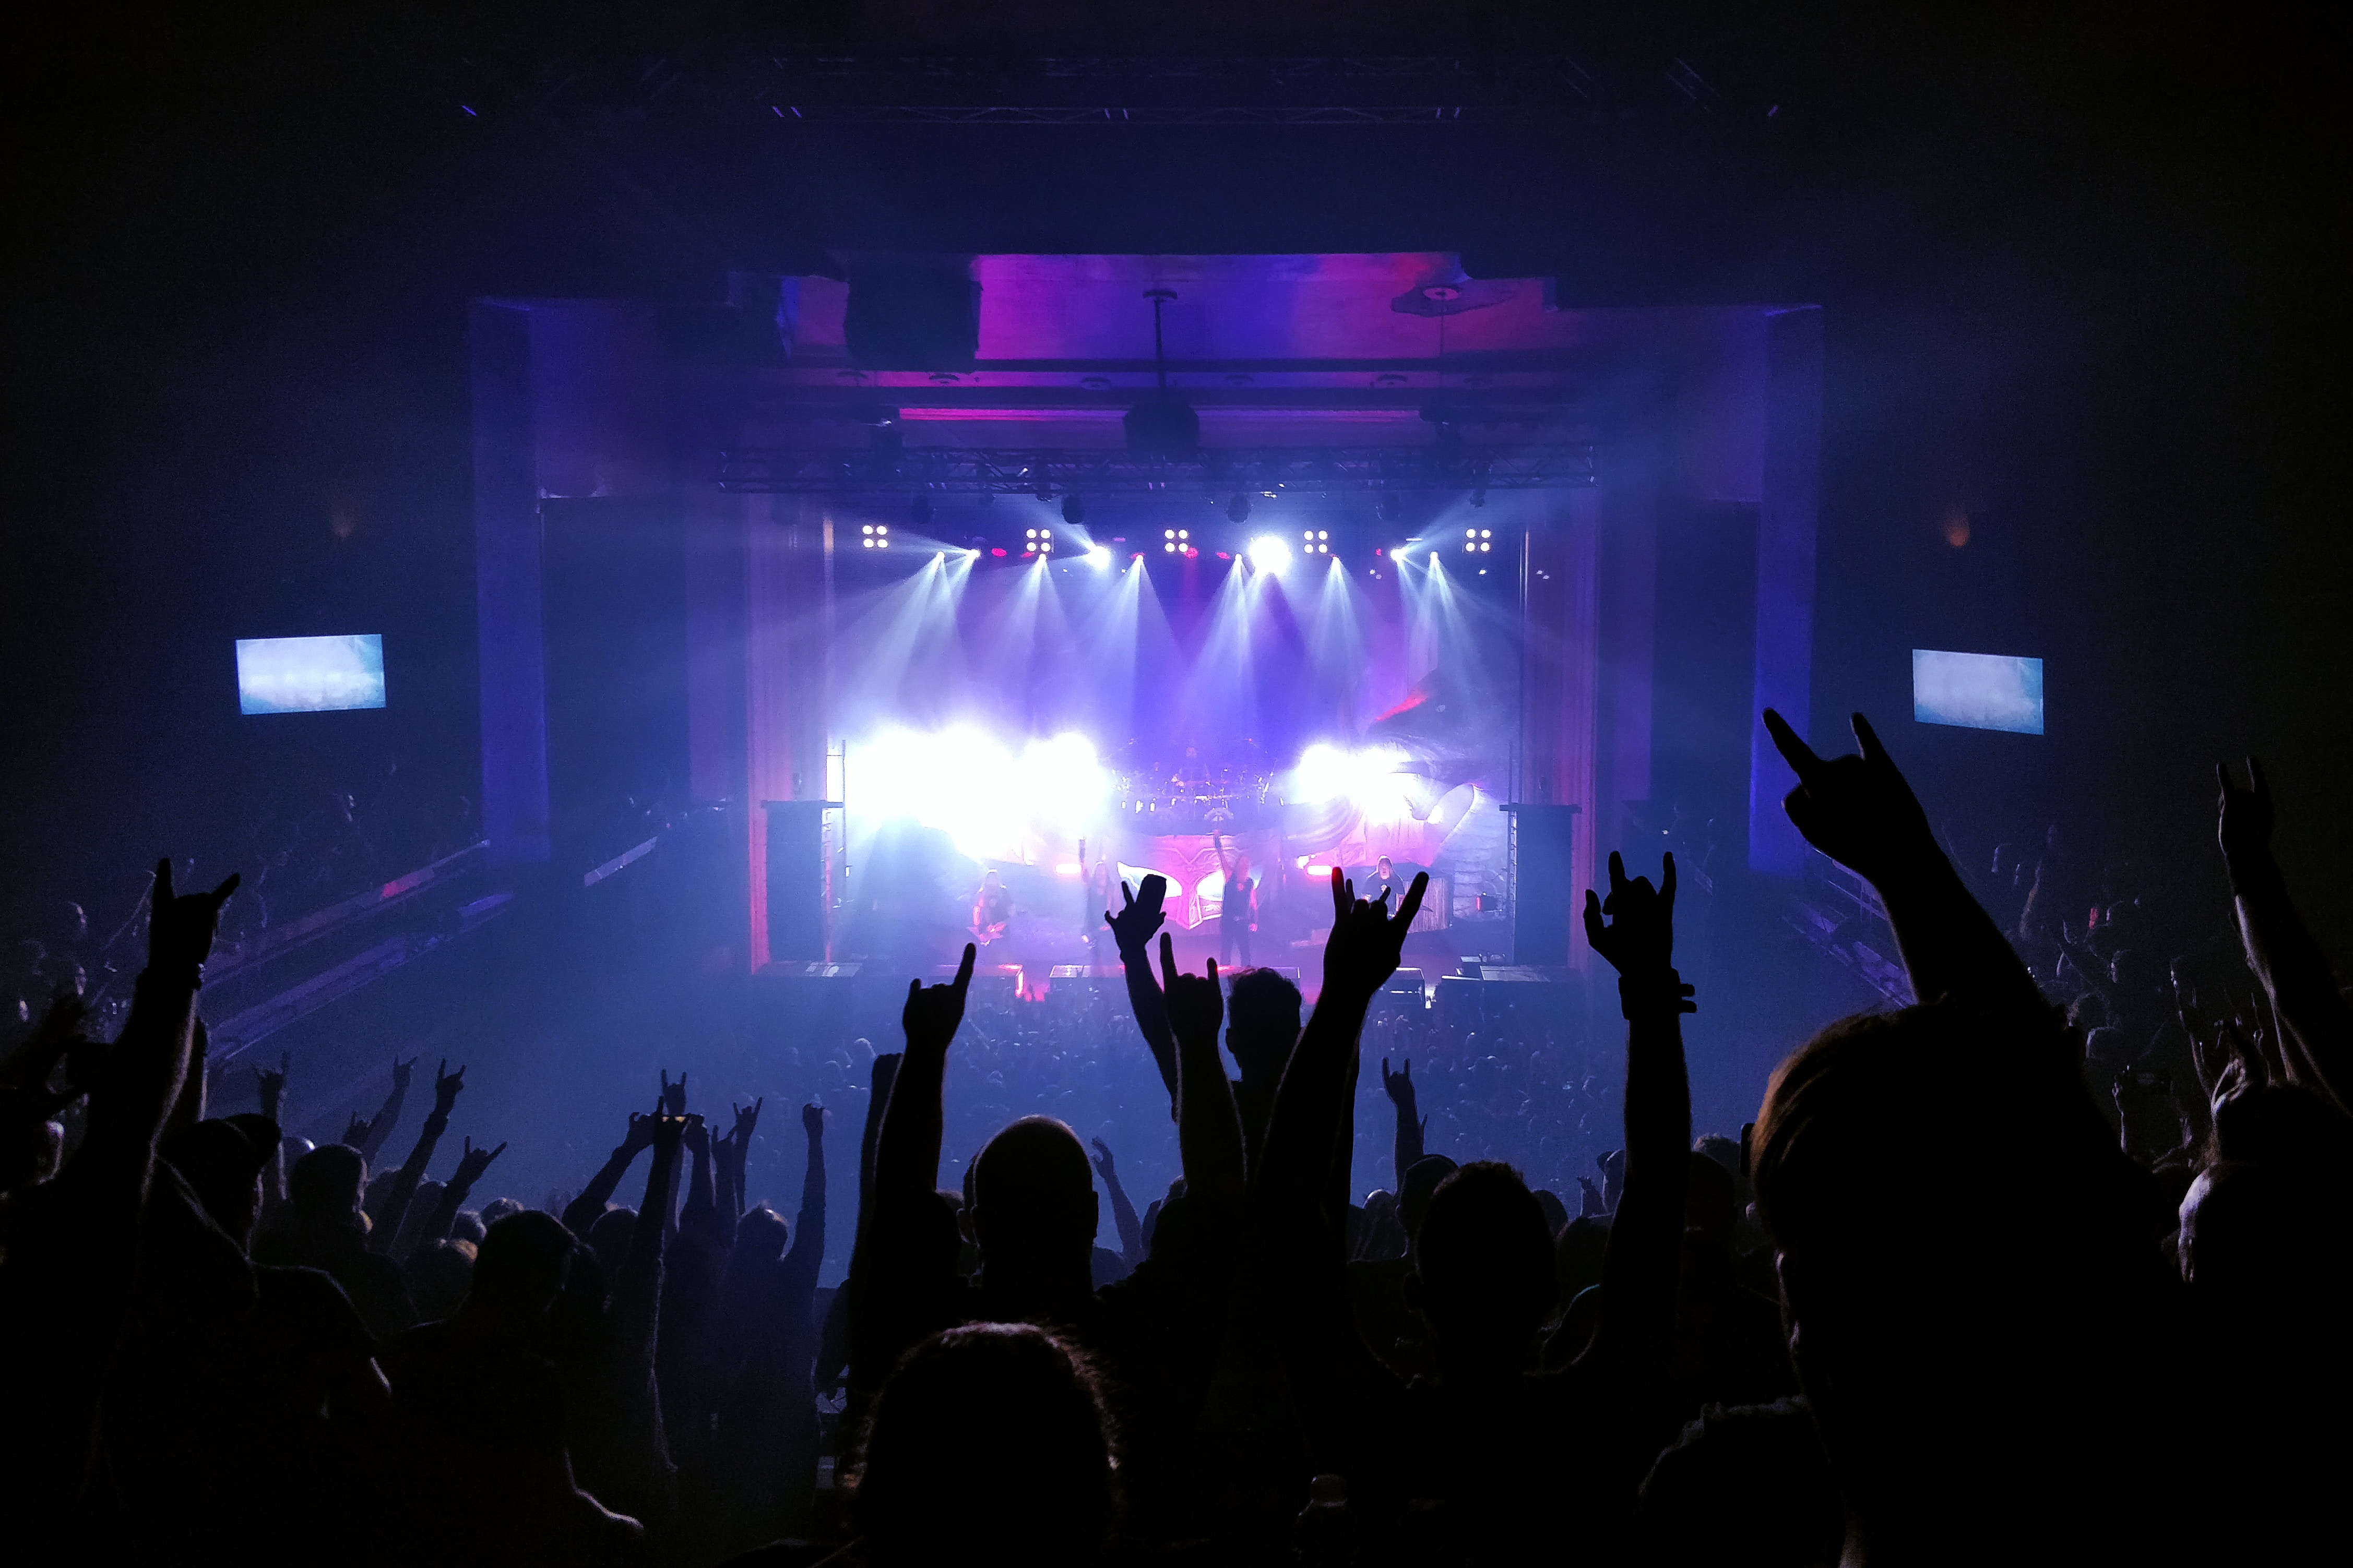 fans raise their hands in the air at a music gig